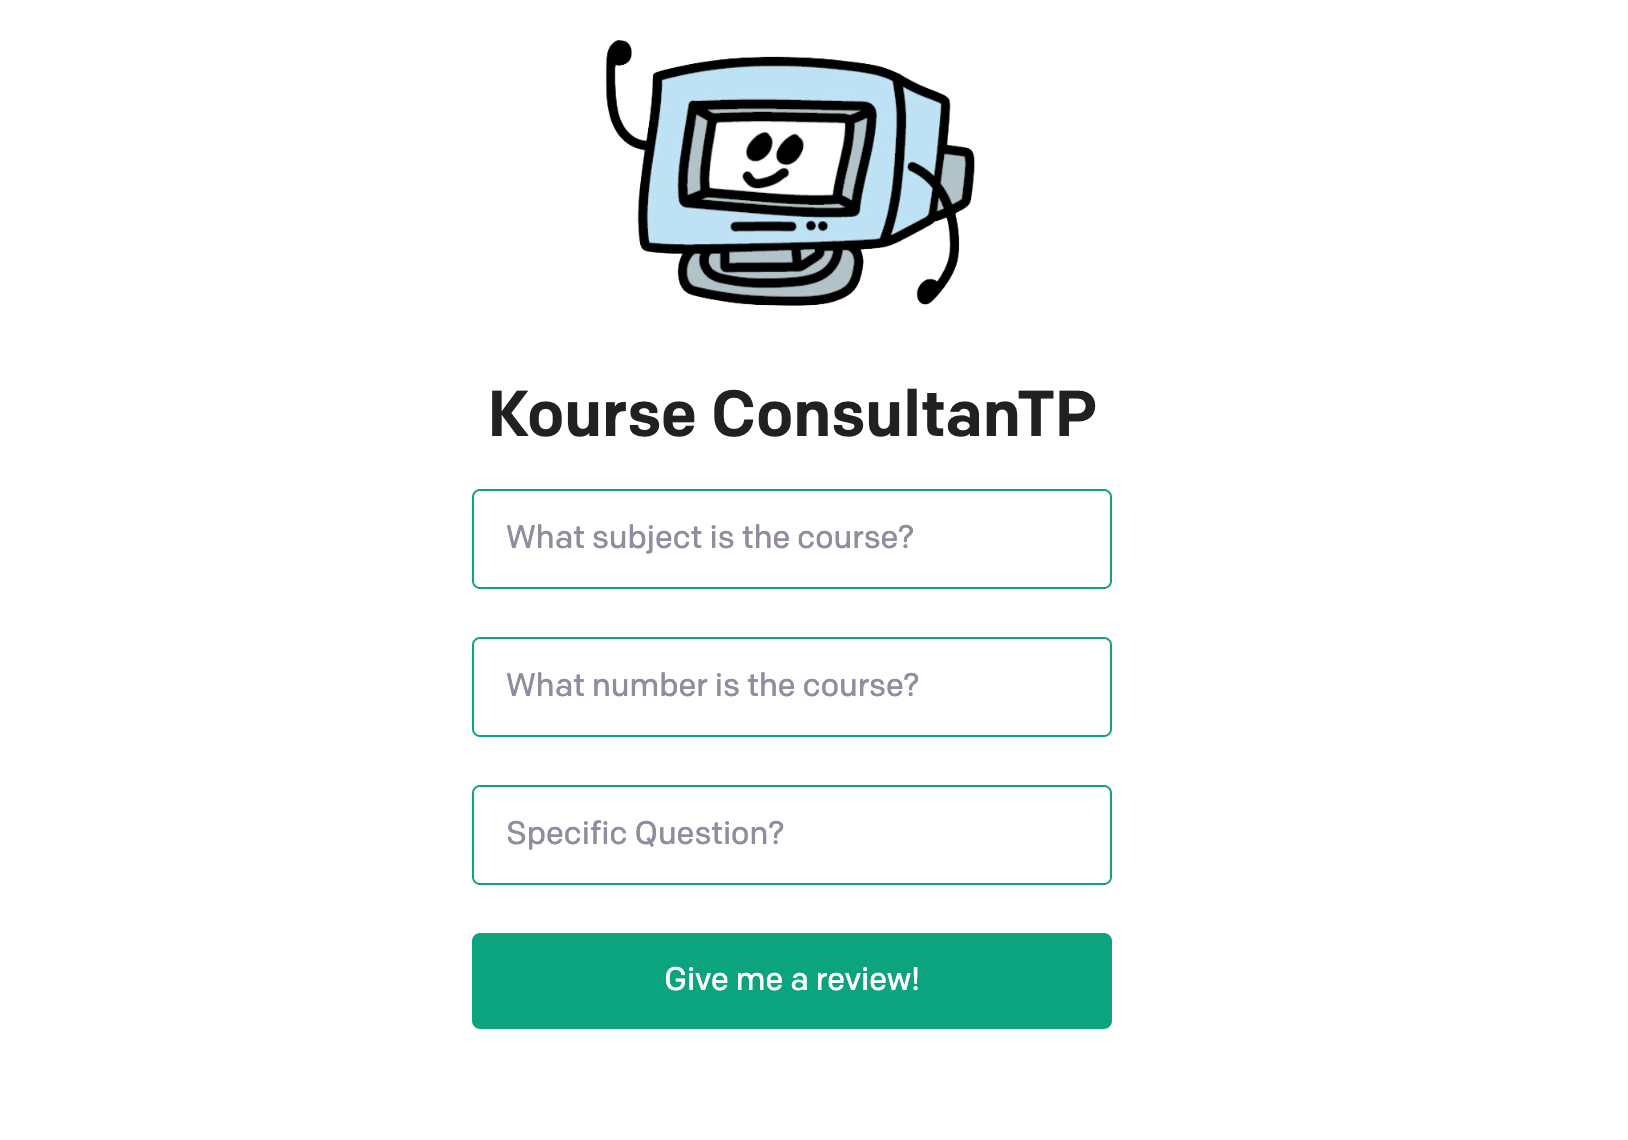 picture of Kourse ConsultanTP interface